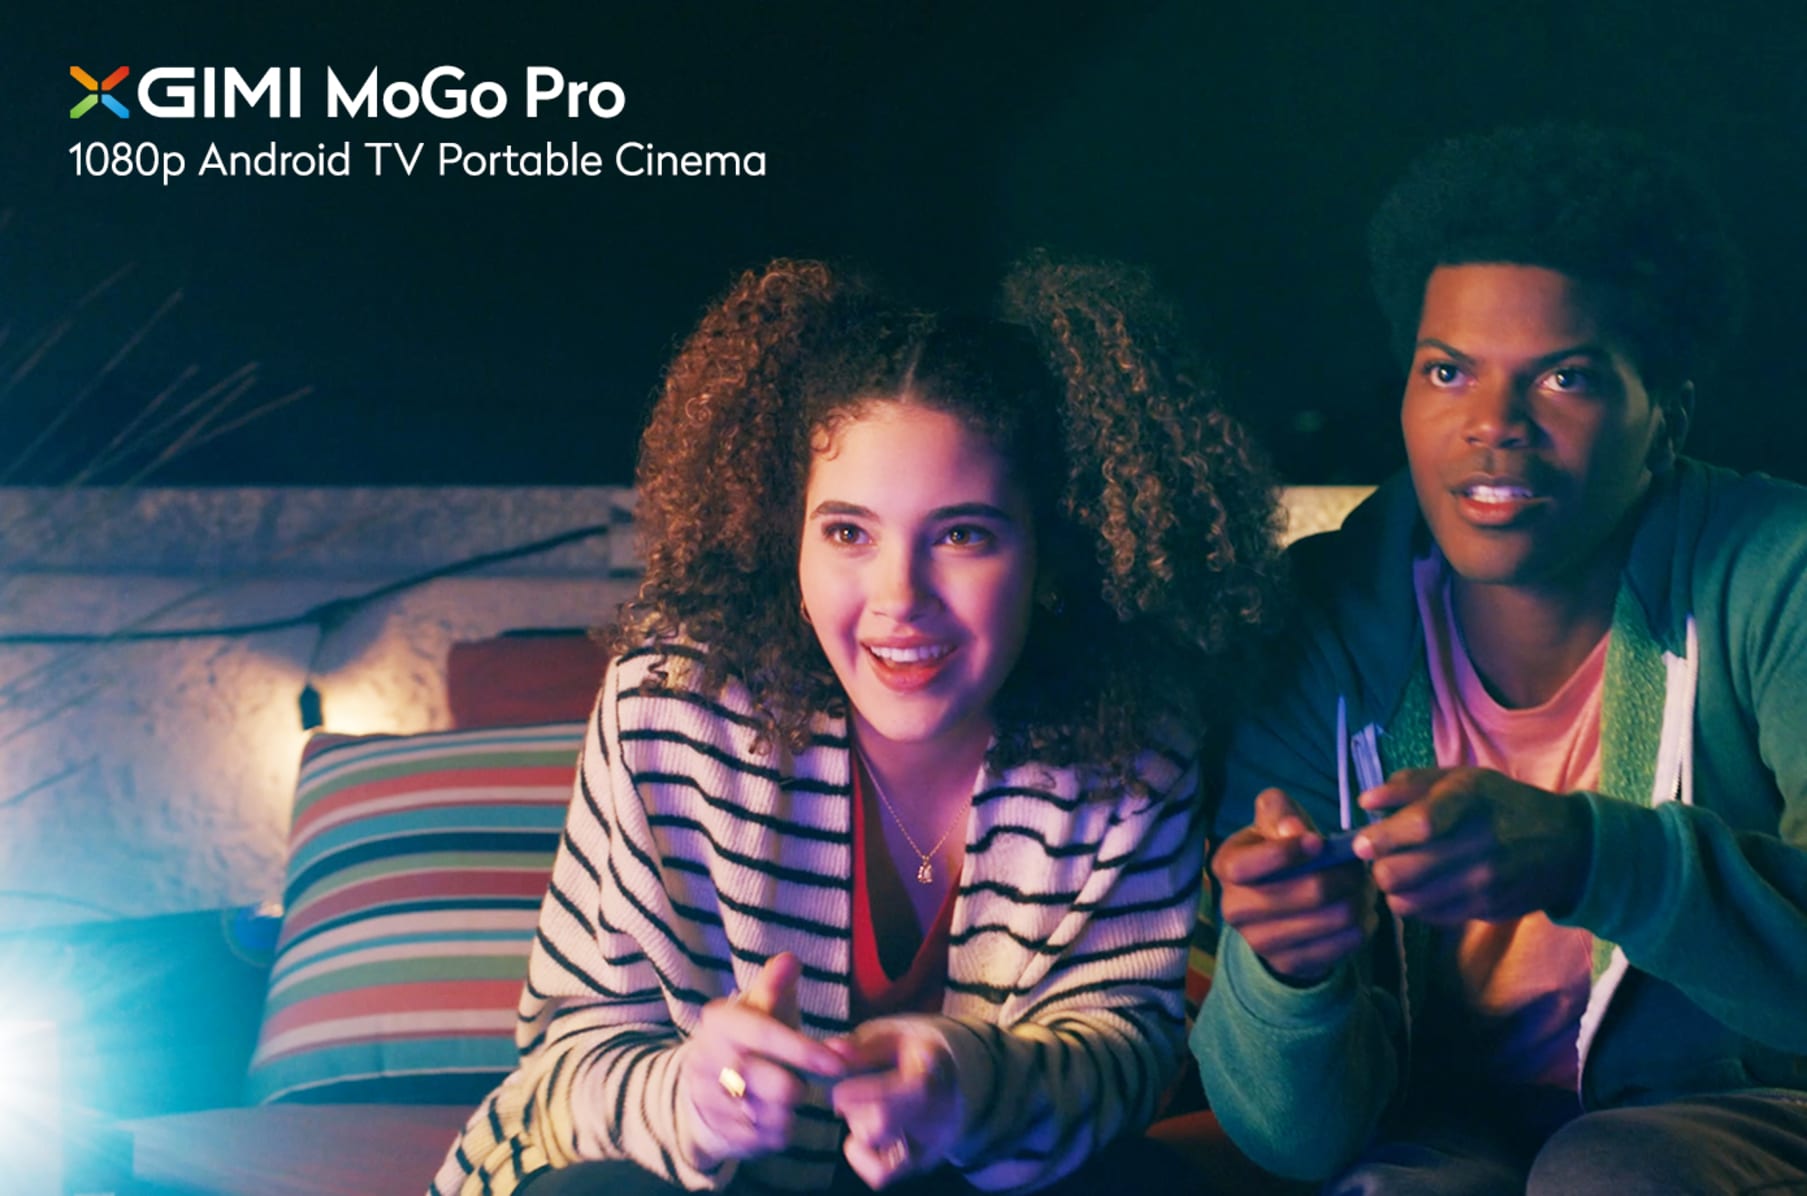 Watch your movies anywhere with XGIMI's MoGo 2 Pro projector - Phandroid